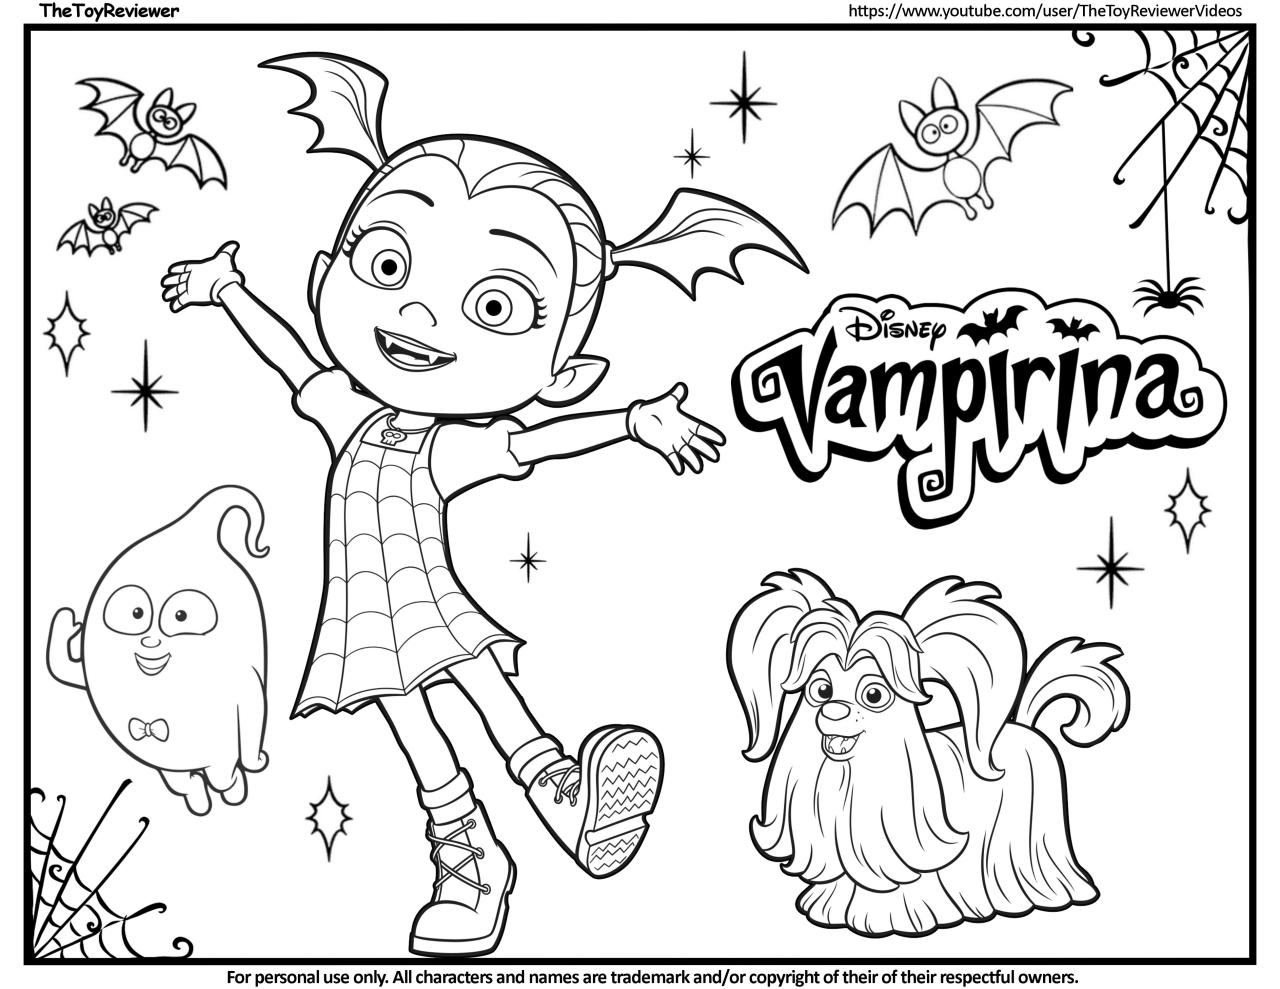 Coloring Pages To Print For Free